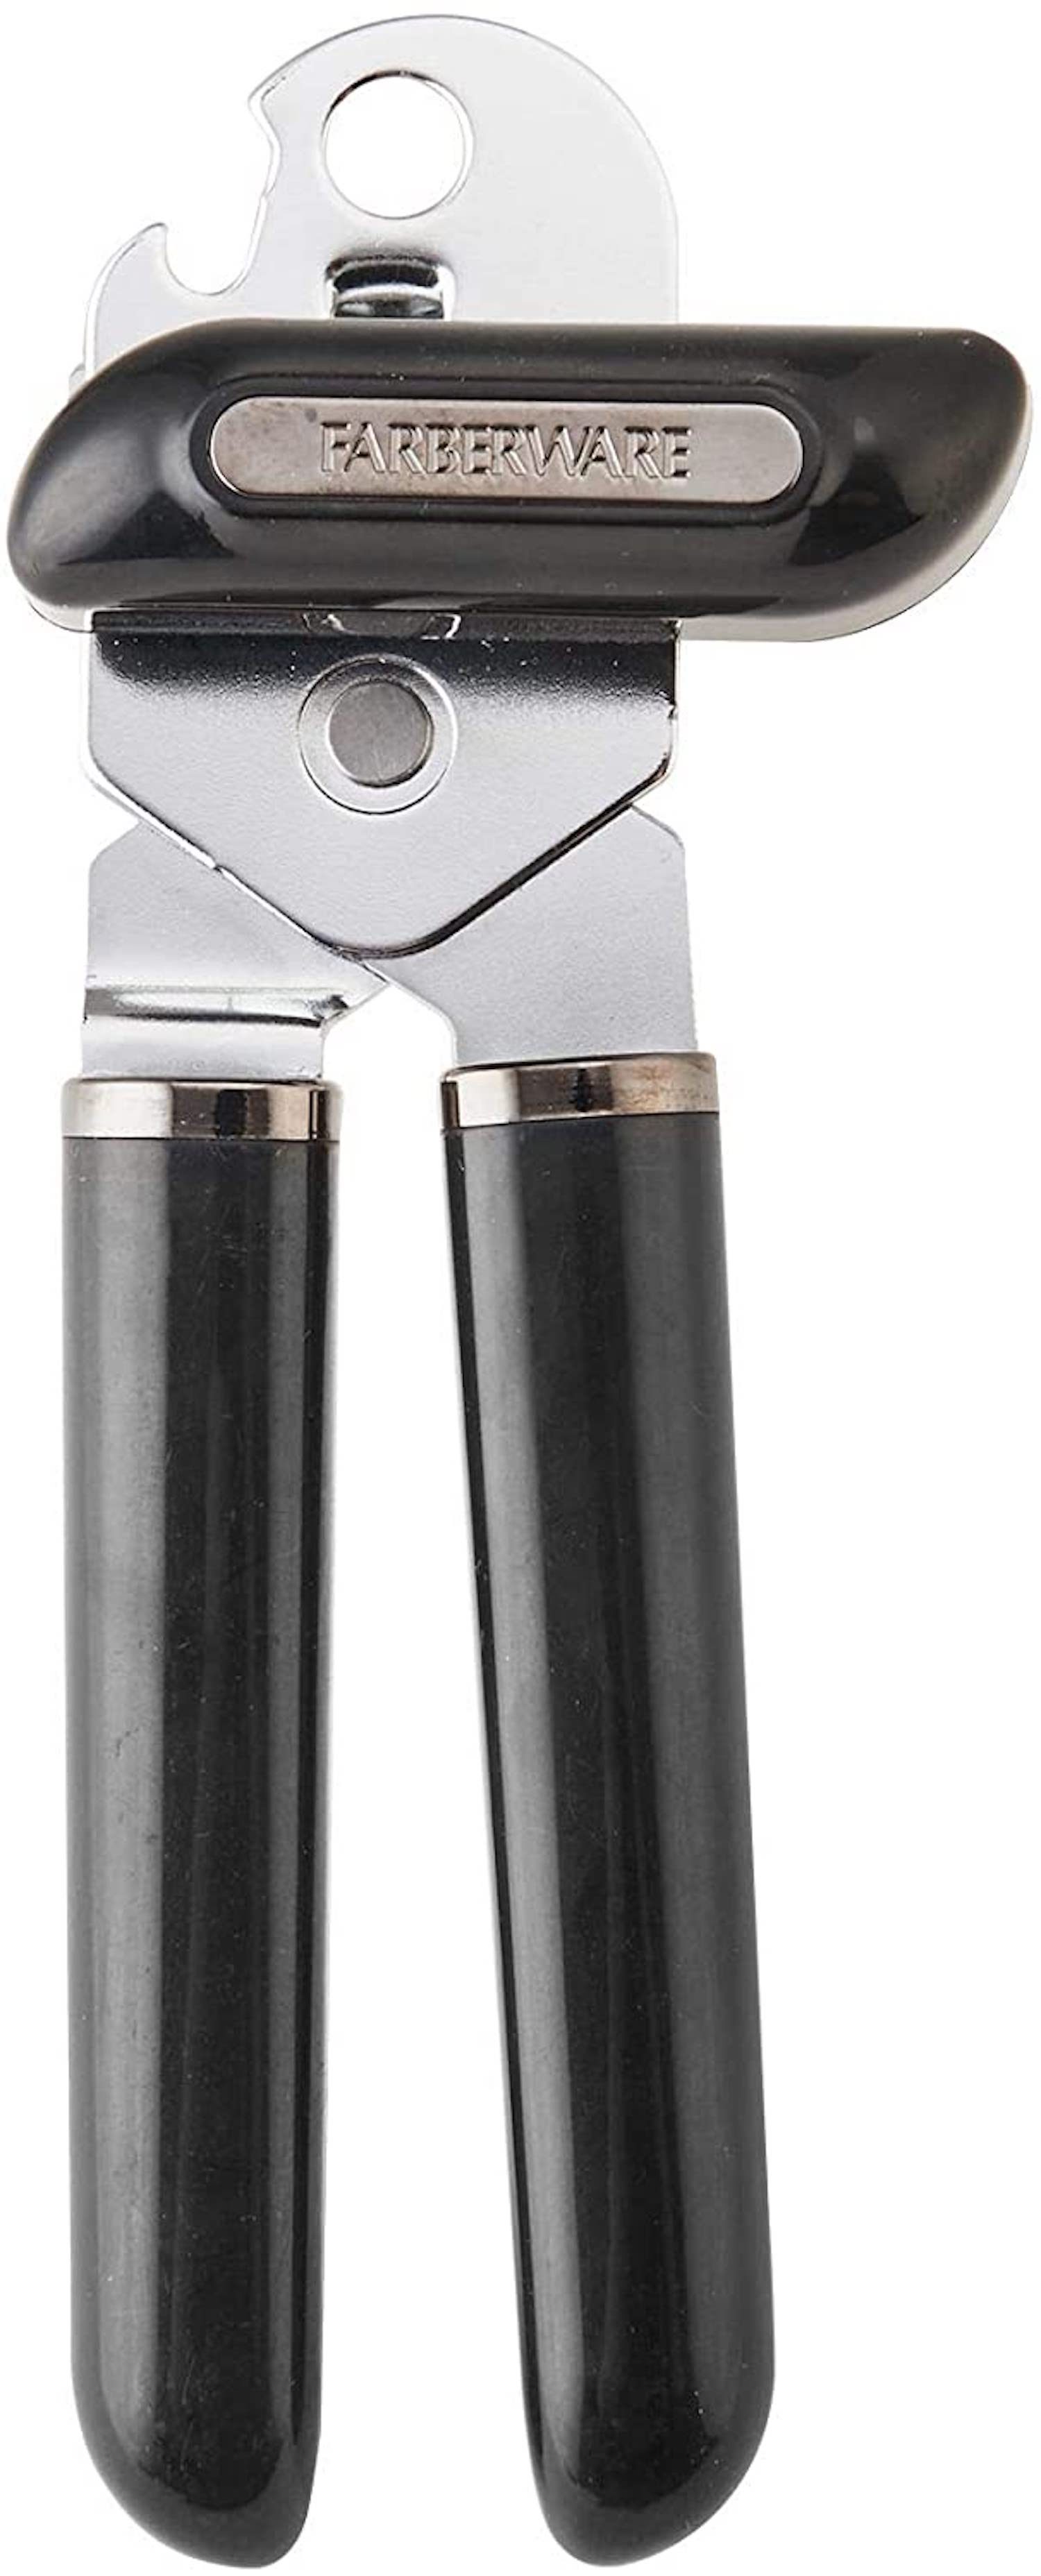  Vegamax Top Cut Can Opener for Left and Right Handed